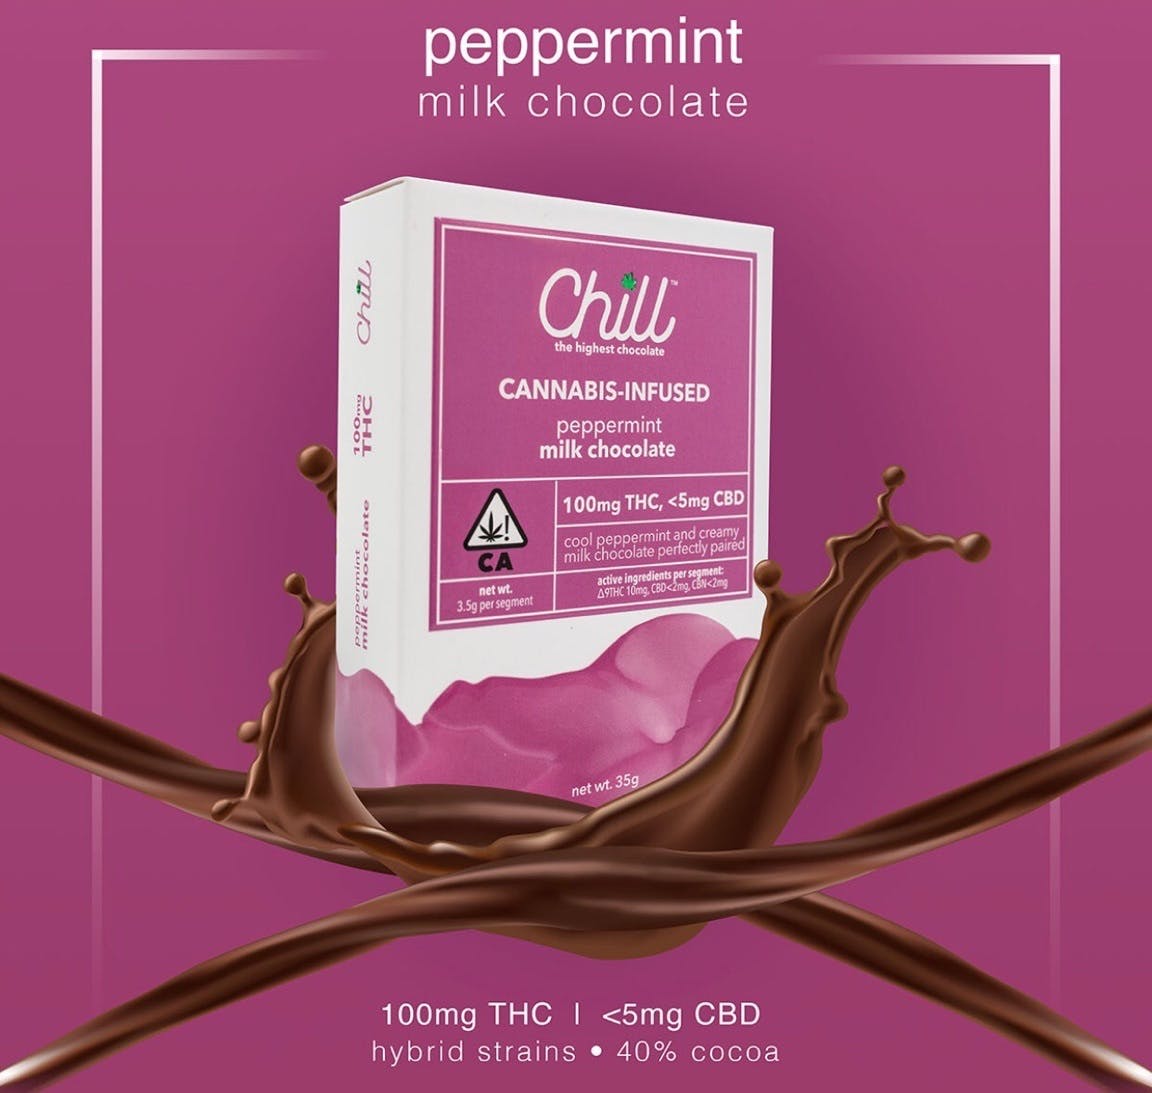 edible-chill-chocolate-chill-chocolate-peppermint-chocolate-bite-10mg